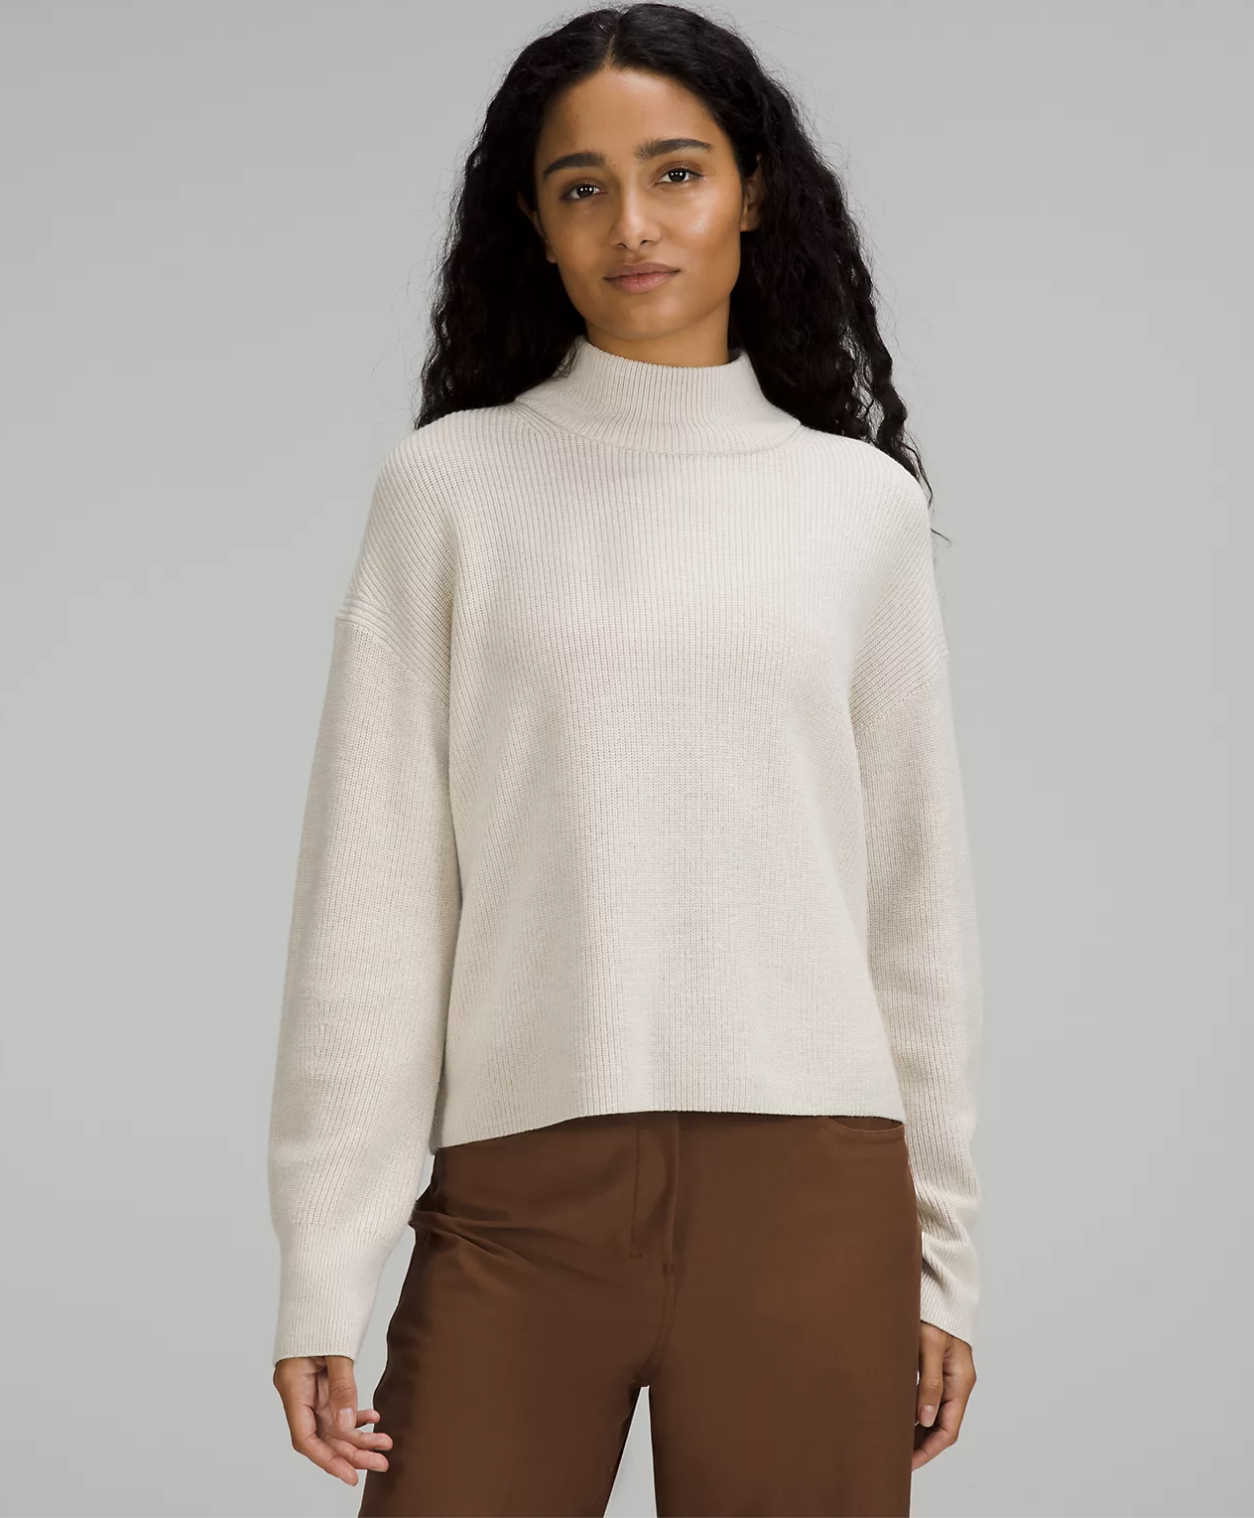 A person wearing the sweater with utility pants